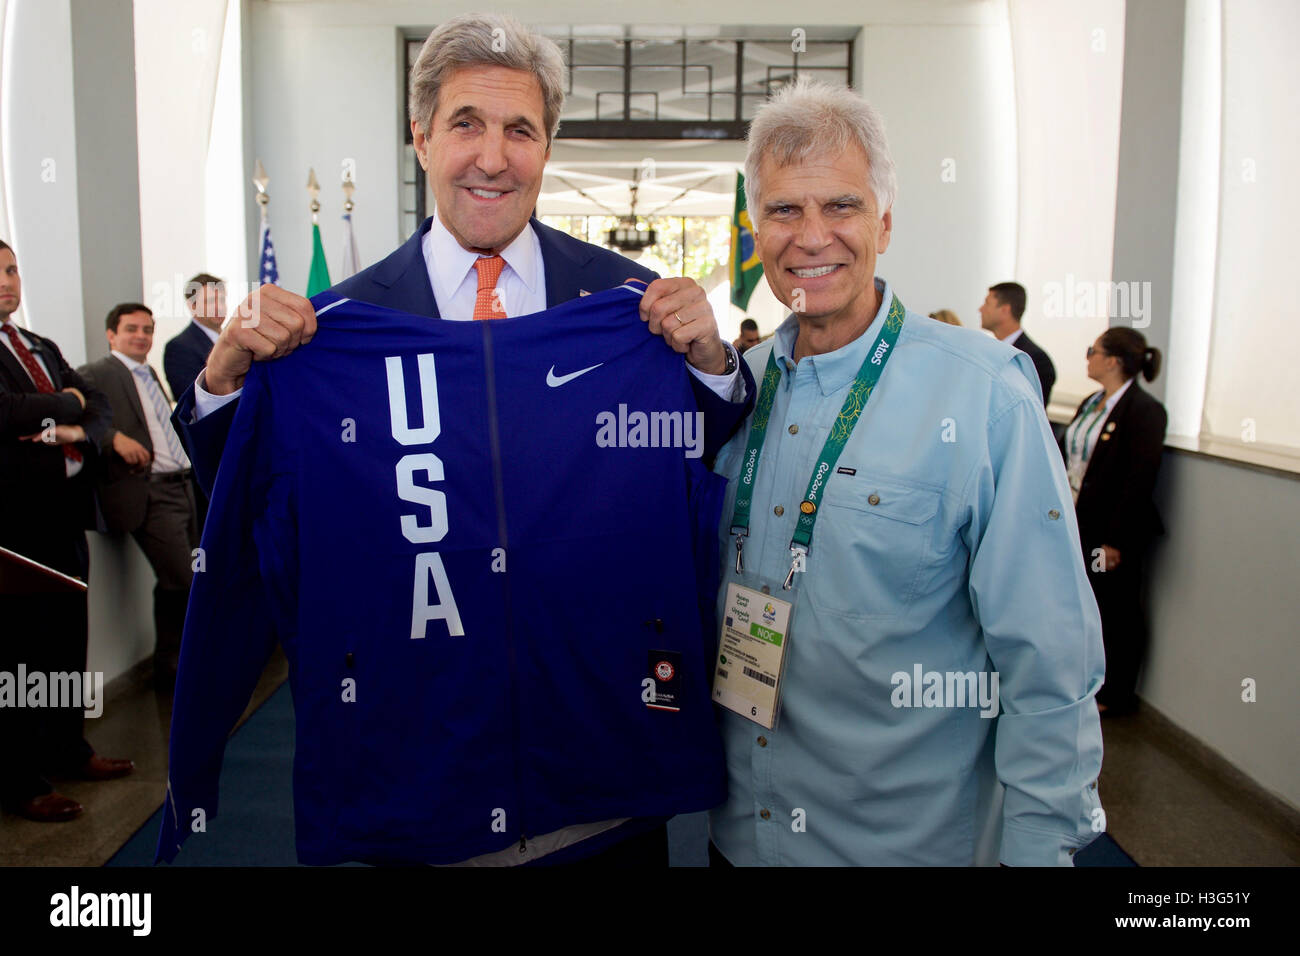 U.S. Secretary of State John Kerry and Mark Spitz - Olympic gold medalist and fellow U.S. Presidential Delegation member - pose with a Team USA jersey as they visit the Brazilian Naval Academy in Rio de Janiero, Brazil, on August 5, 2016, before they meet U.S. athletes training at the facility. Stock Photo